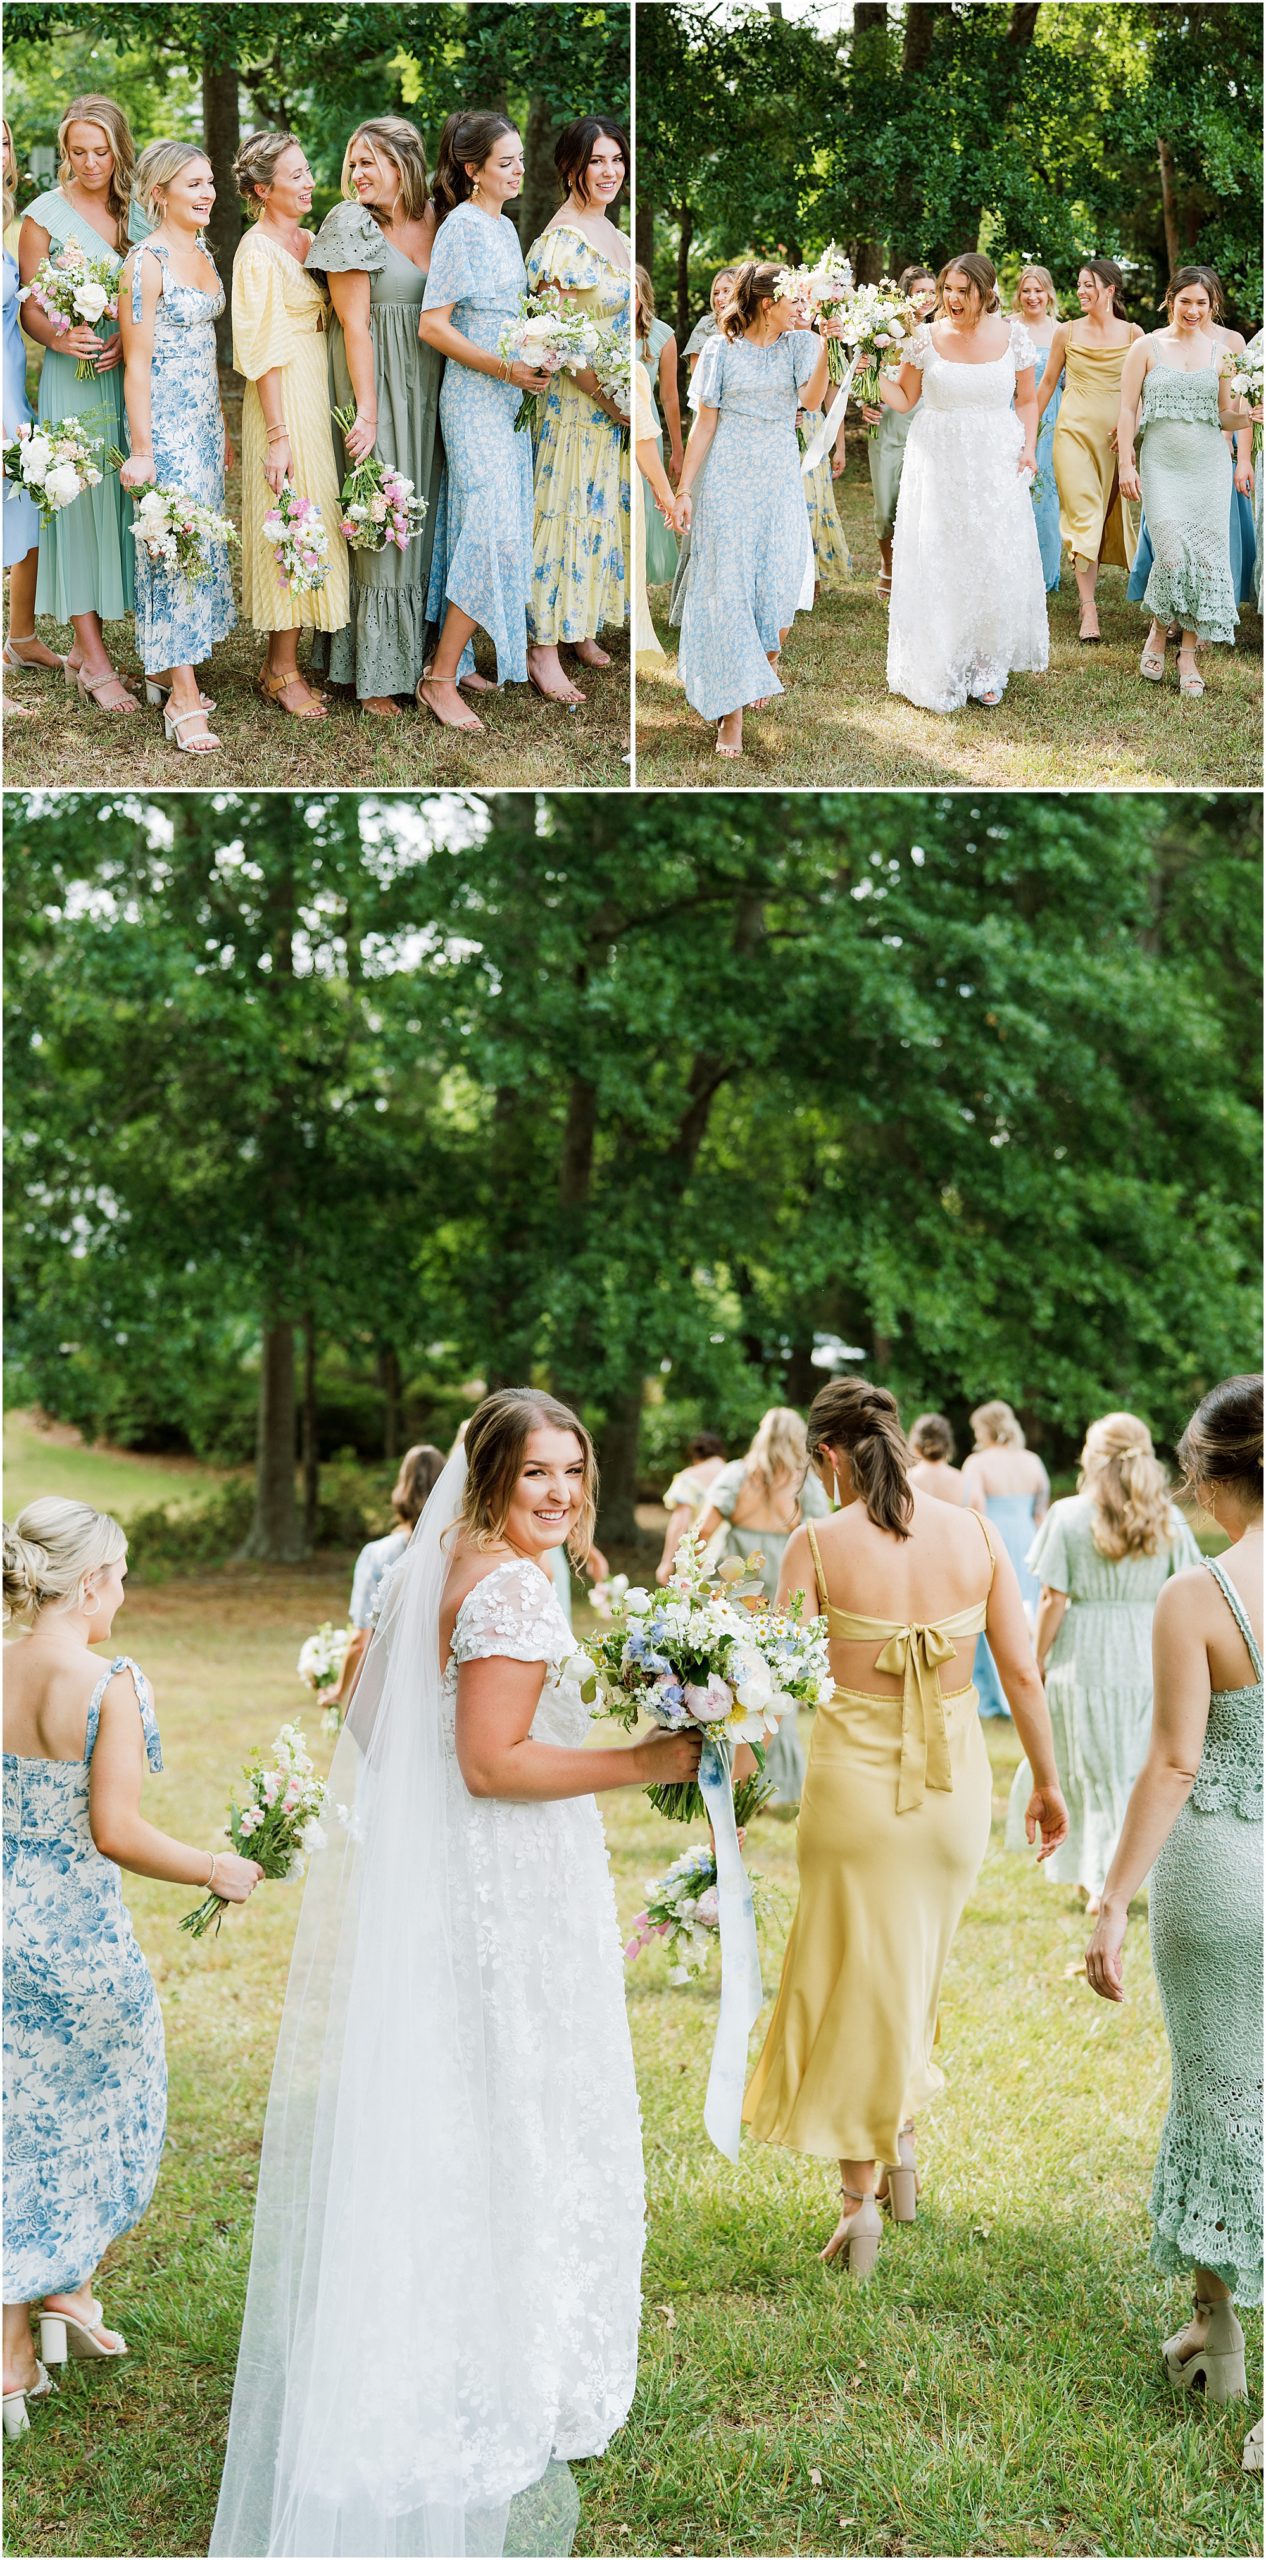 Bridesmaids in different floral dresses. Bridesmaids in a green and blue color palette.